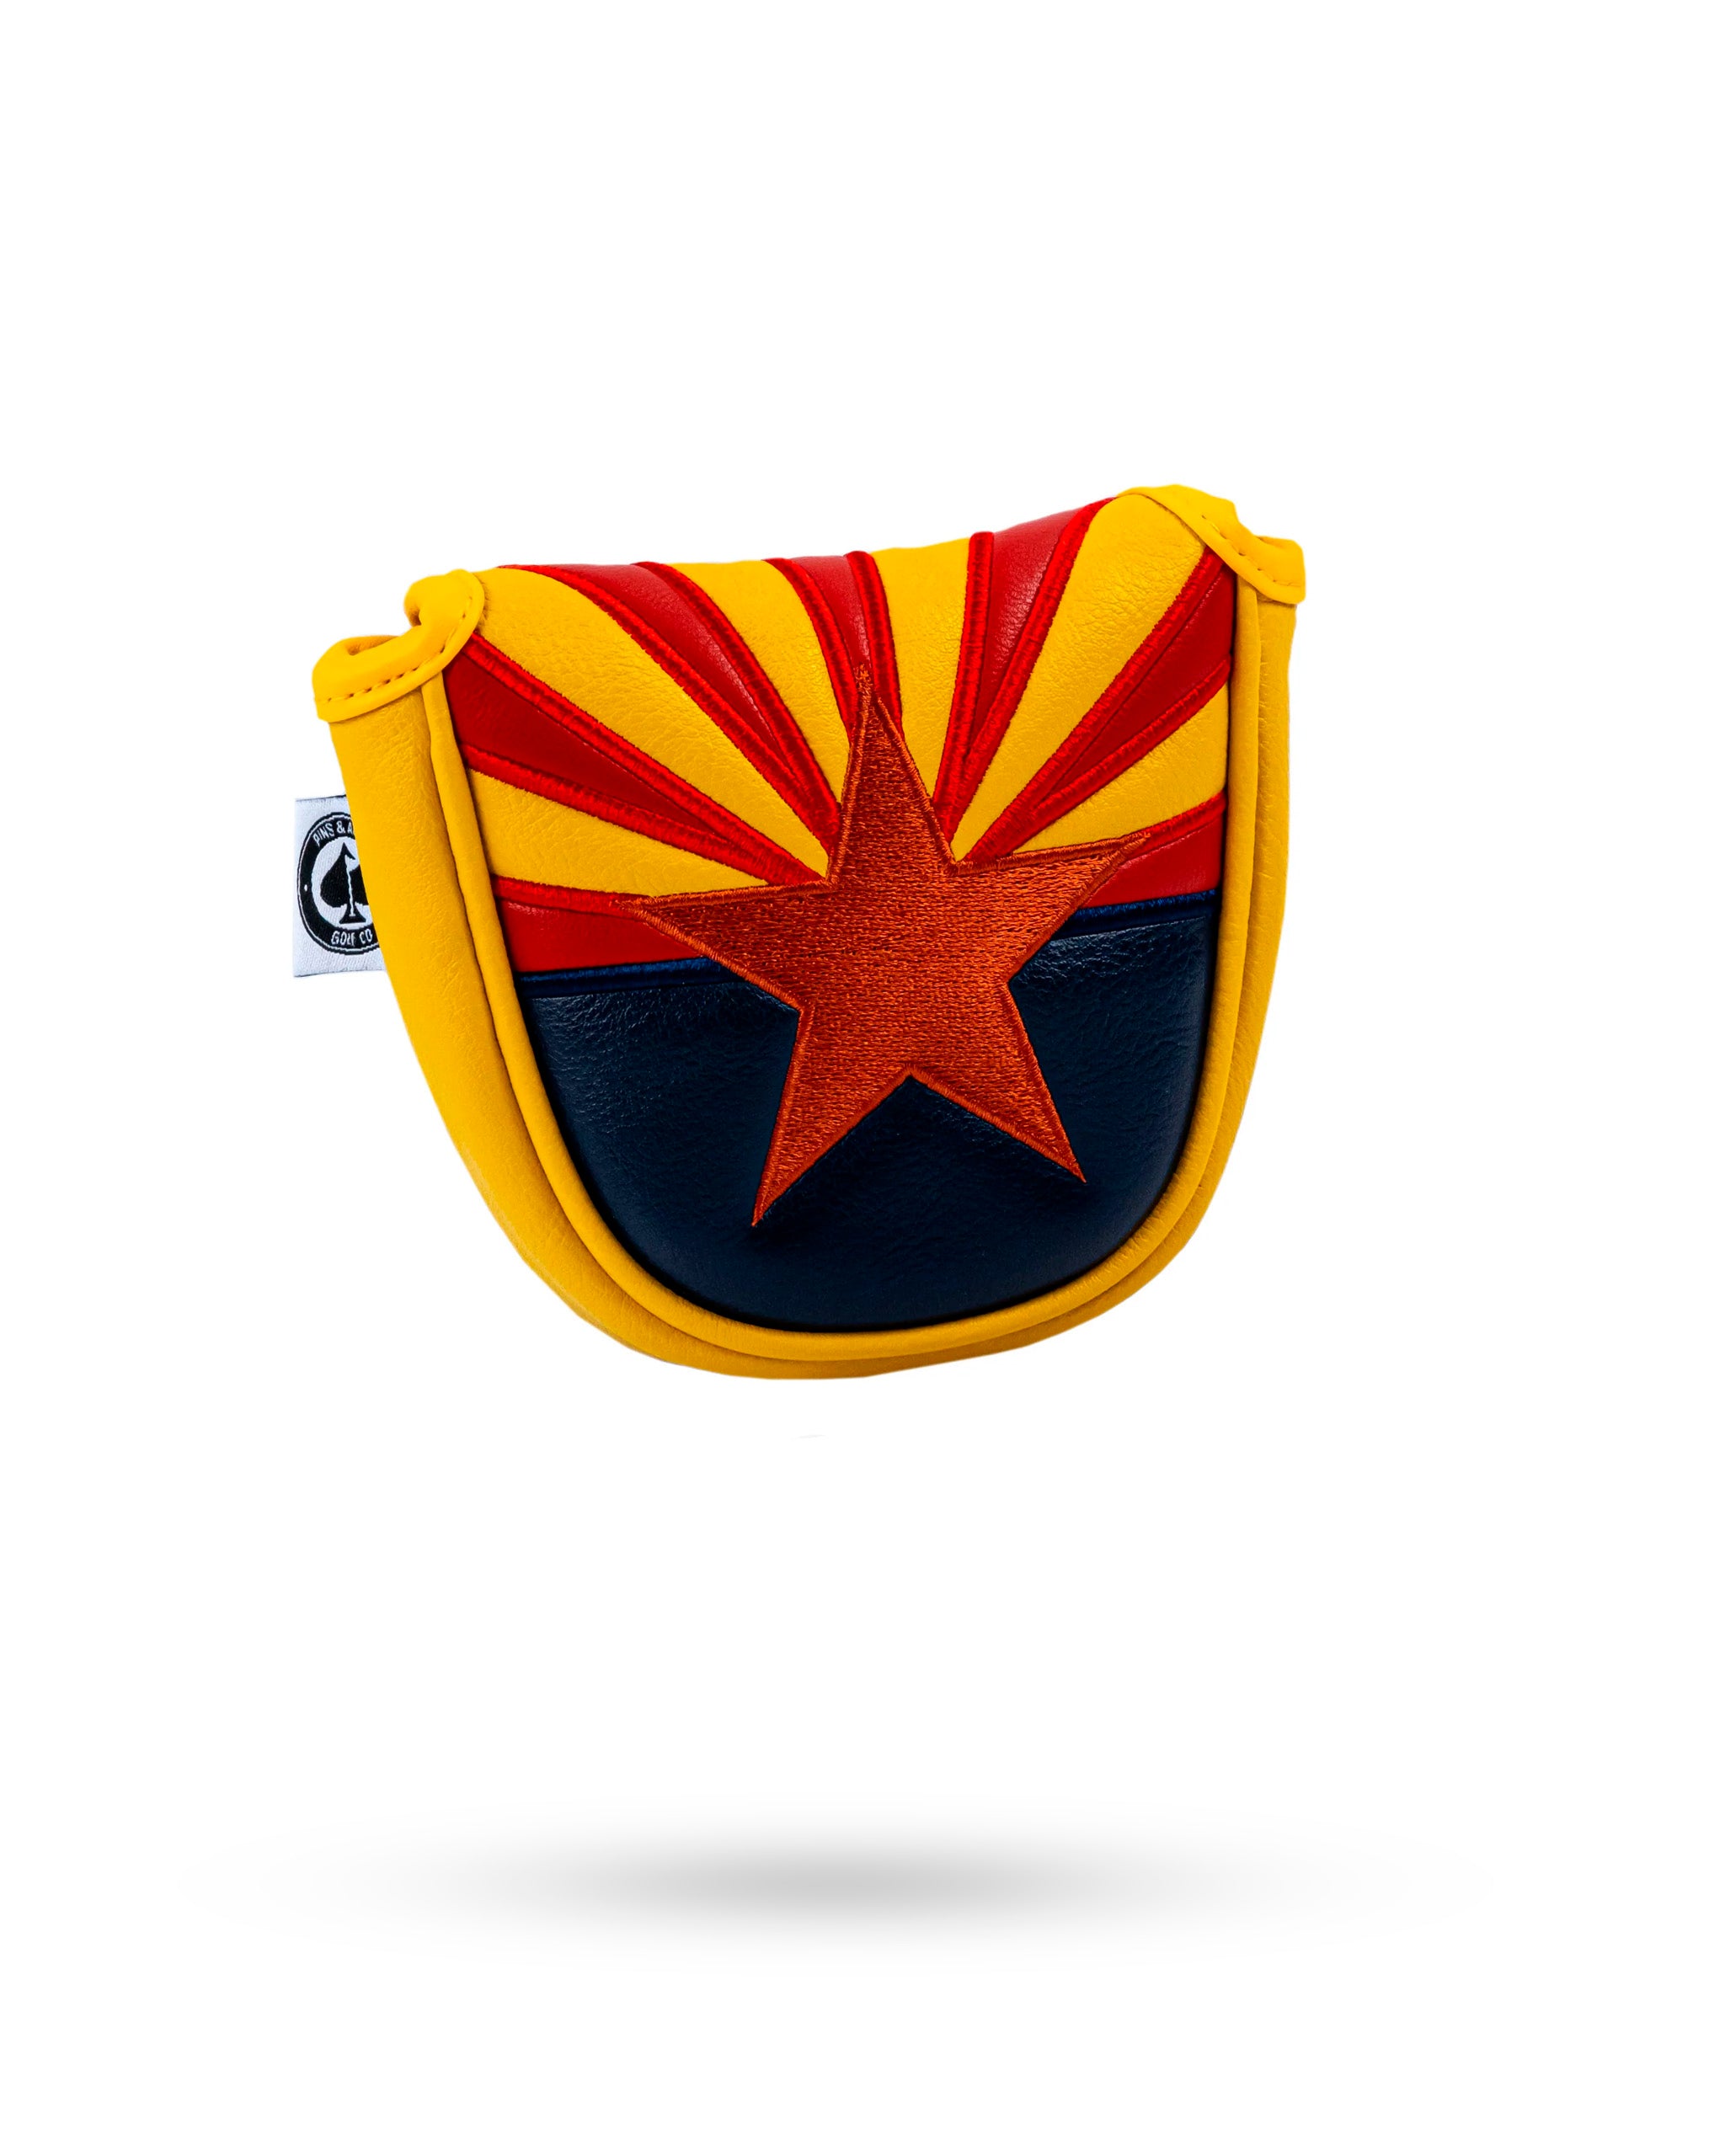 Arizona State Tribute - Mallet Putter Cover